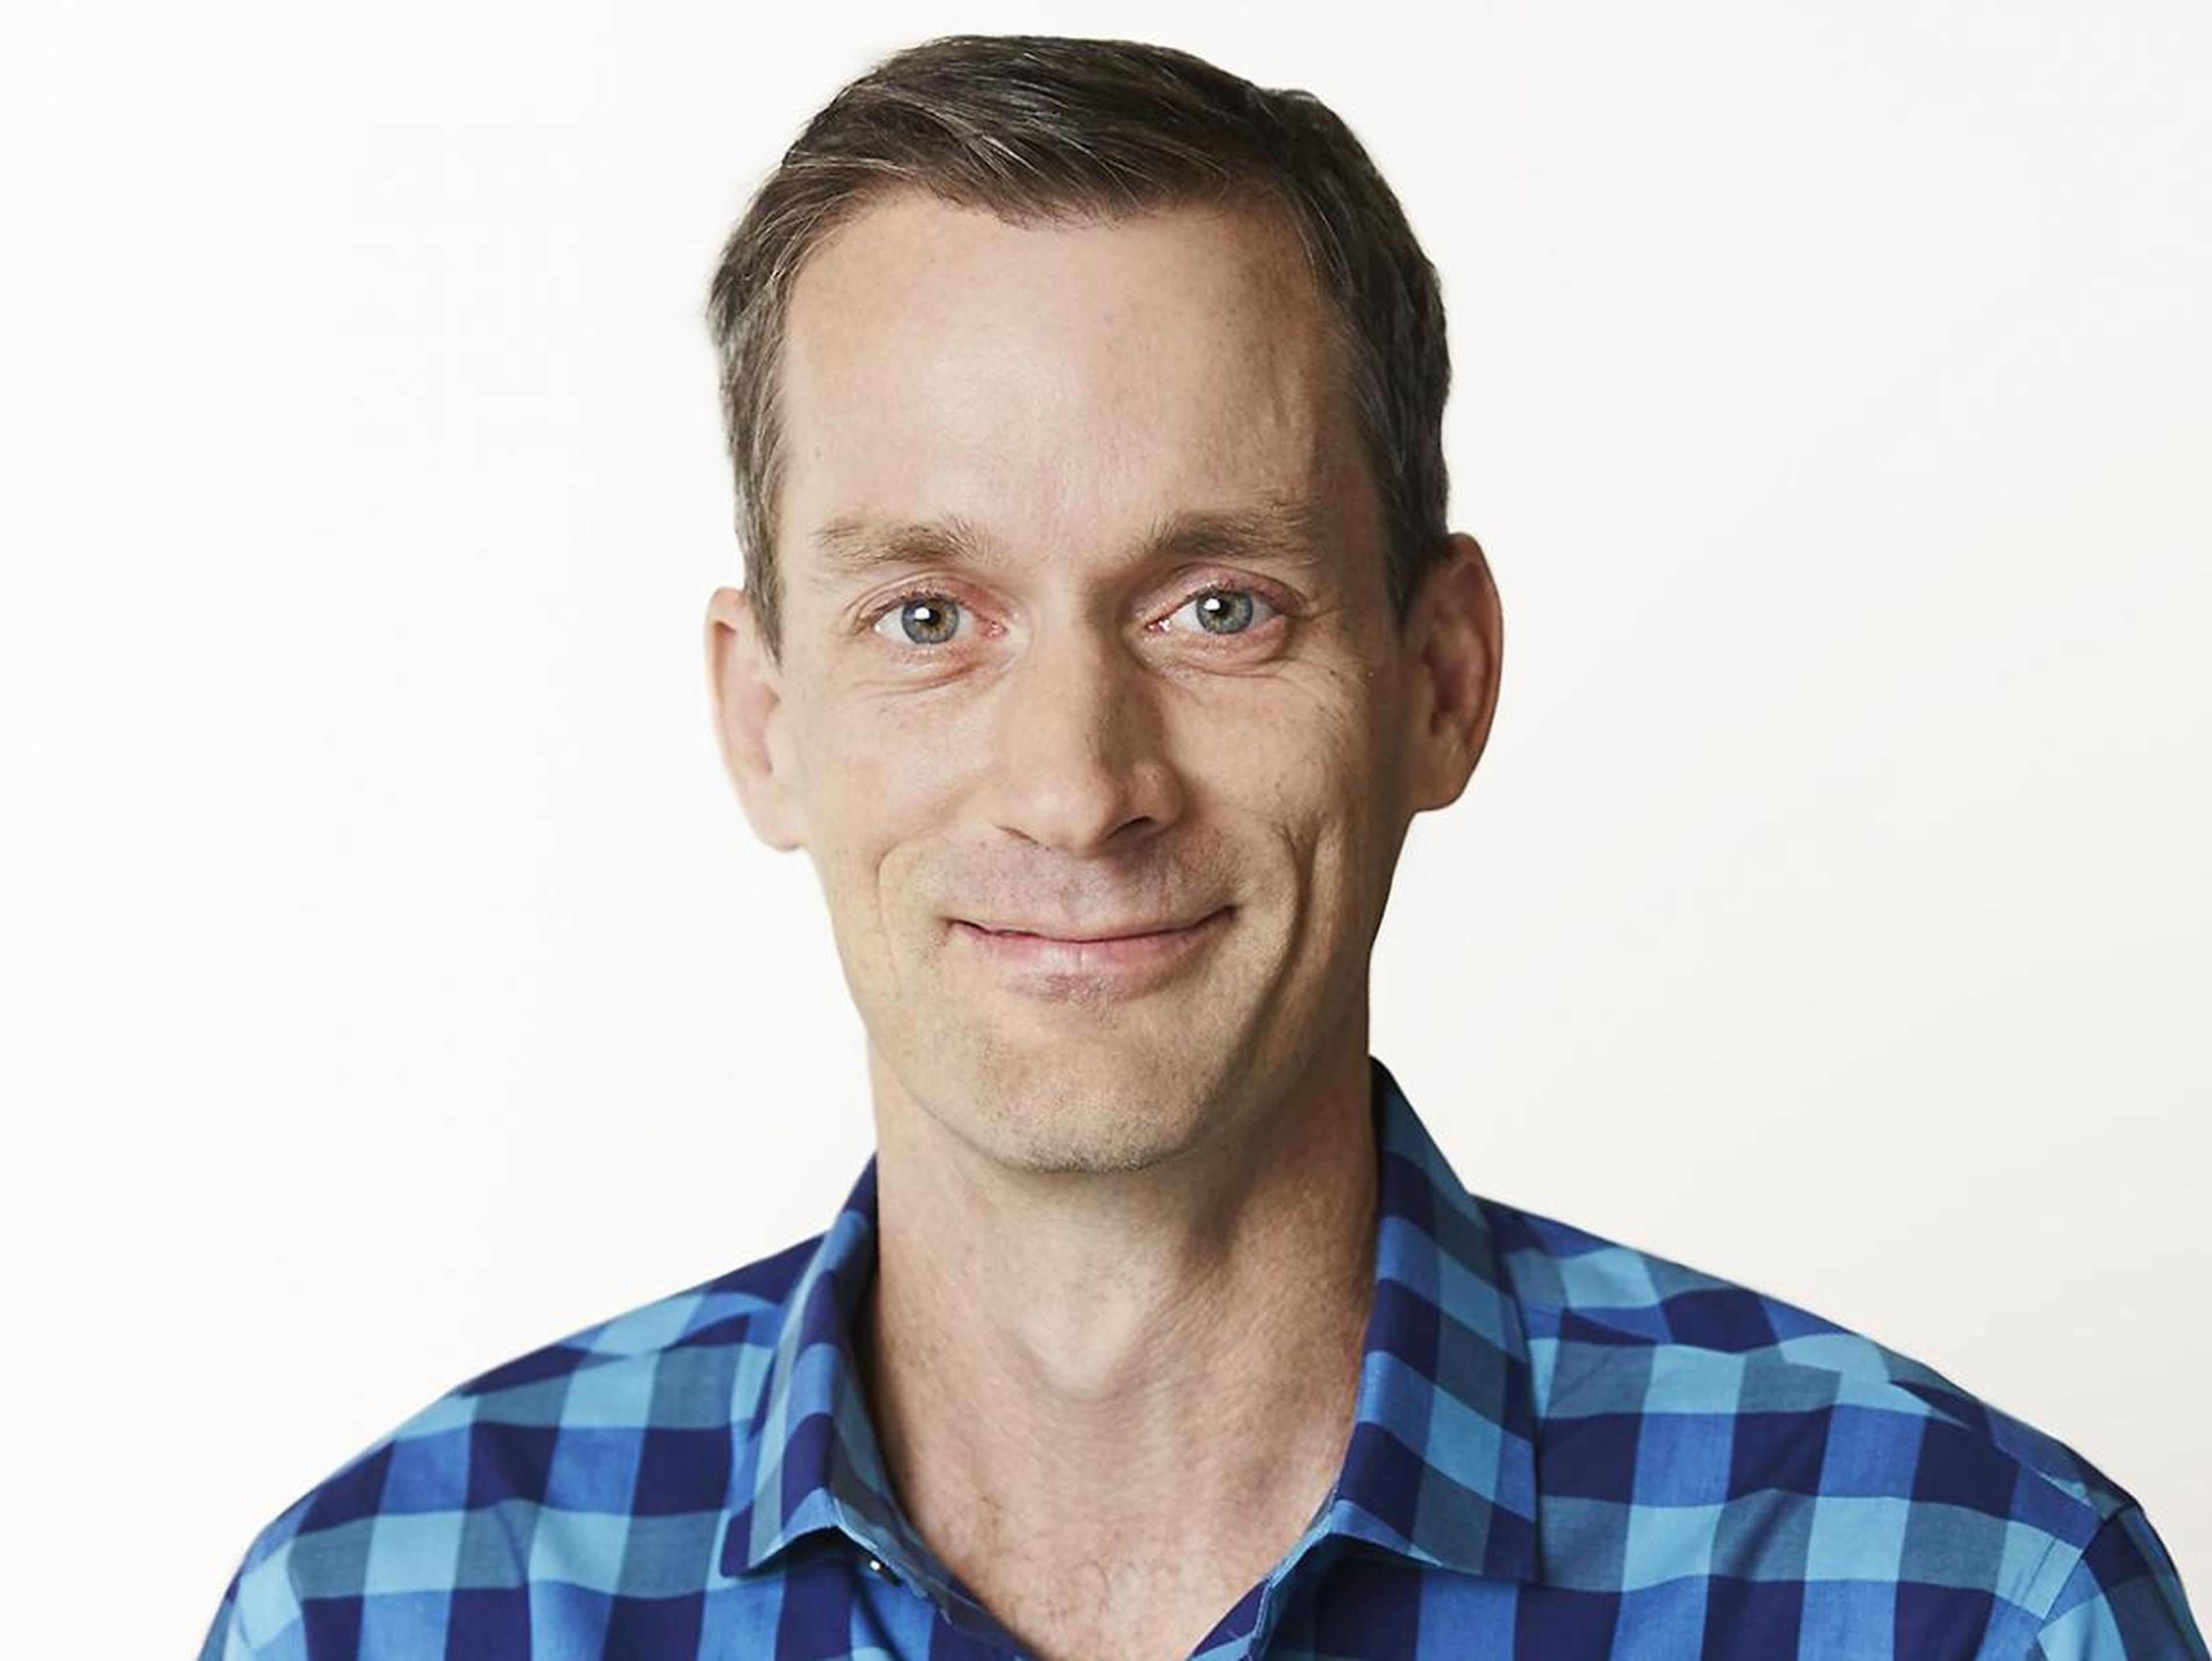 Jeff Dean, a senior fellow for artificial intelligence at Google, is making the AI of science fiction a reality